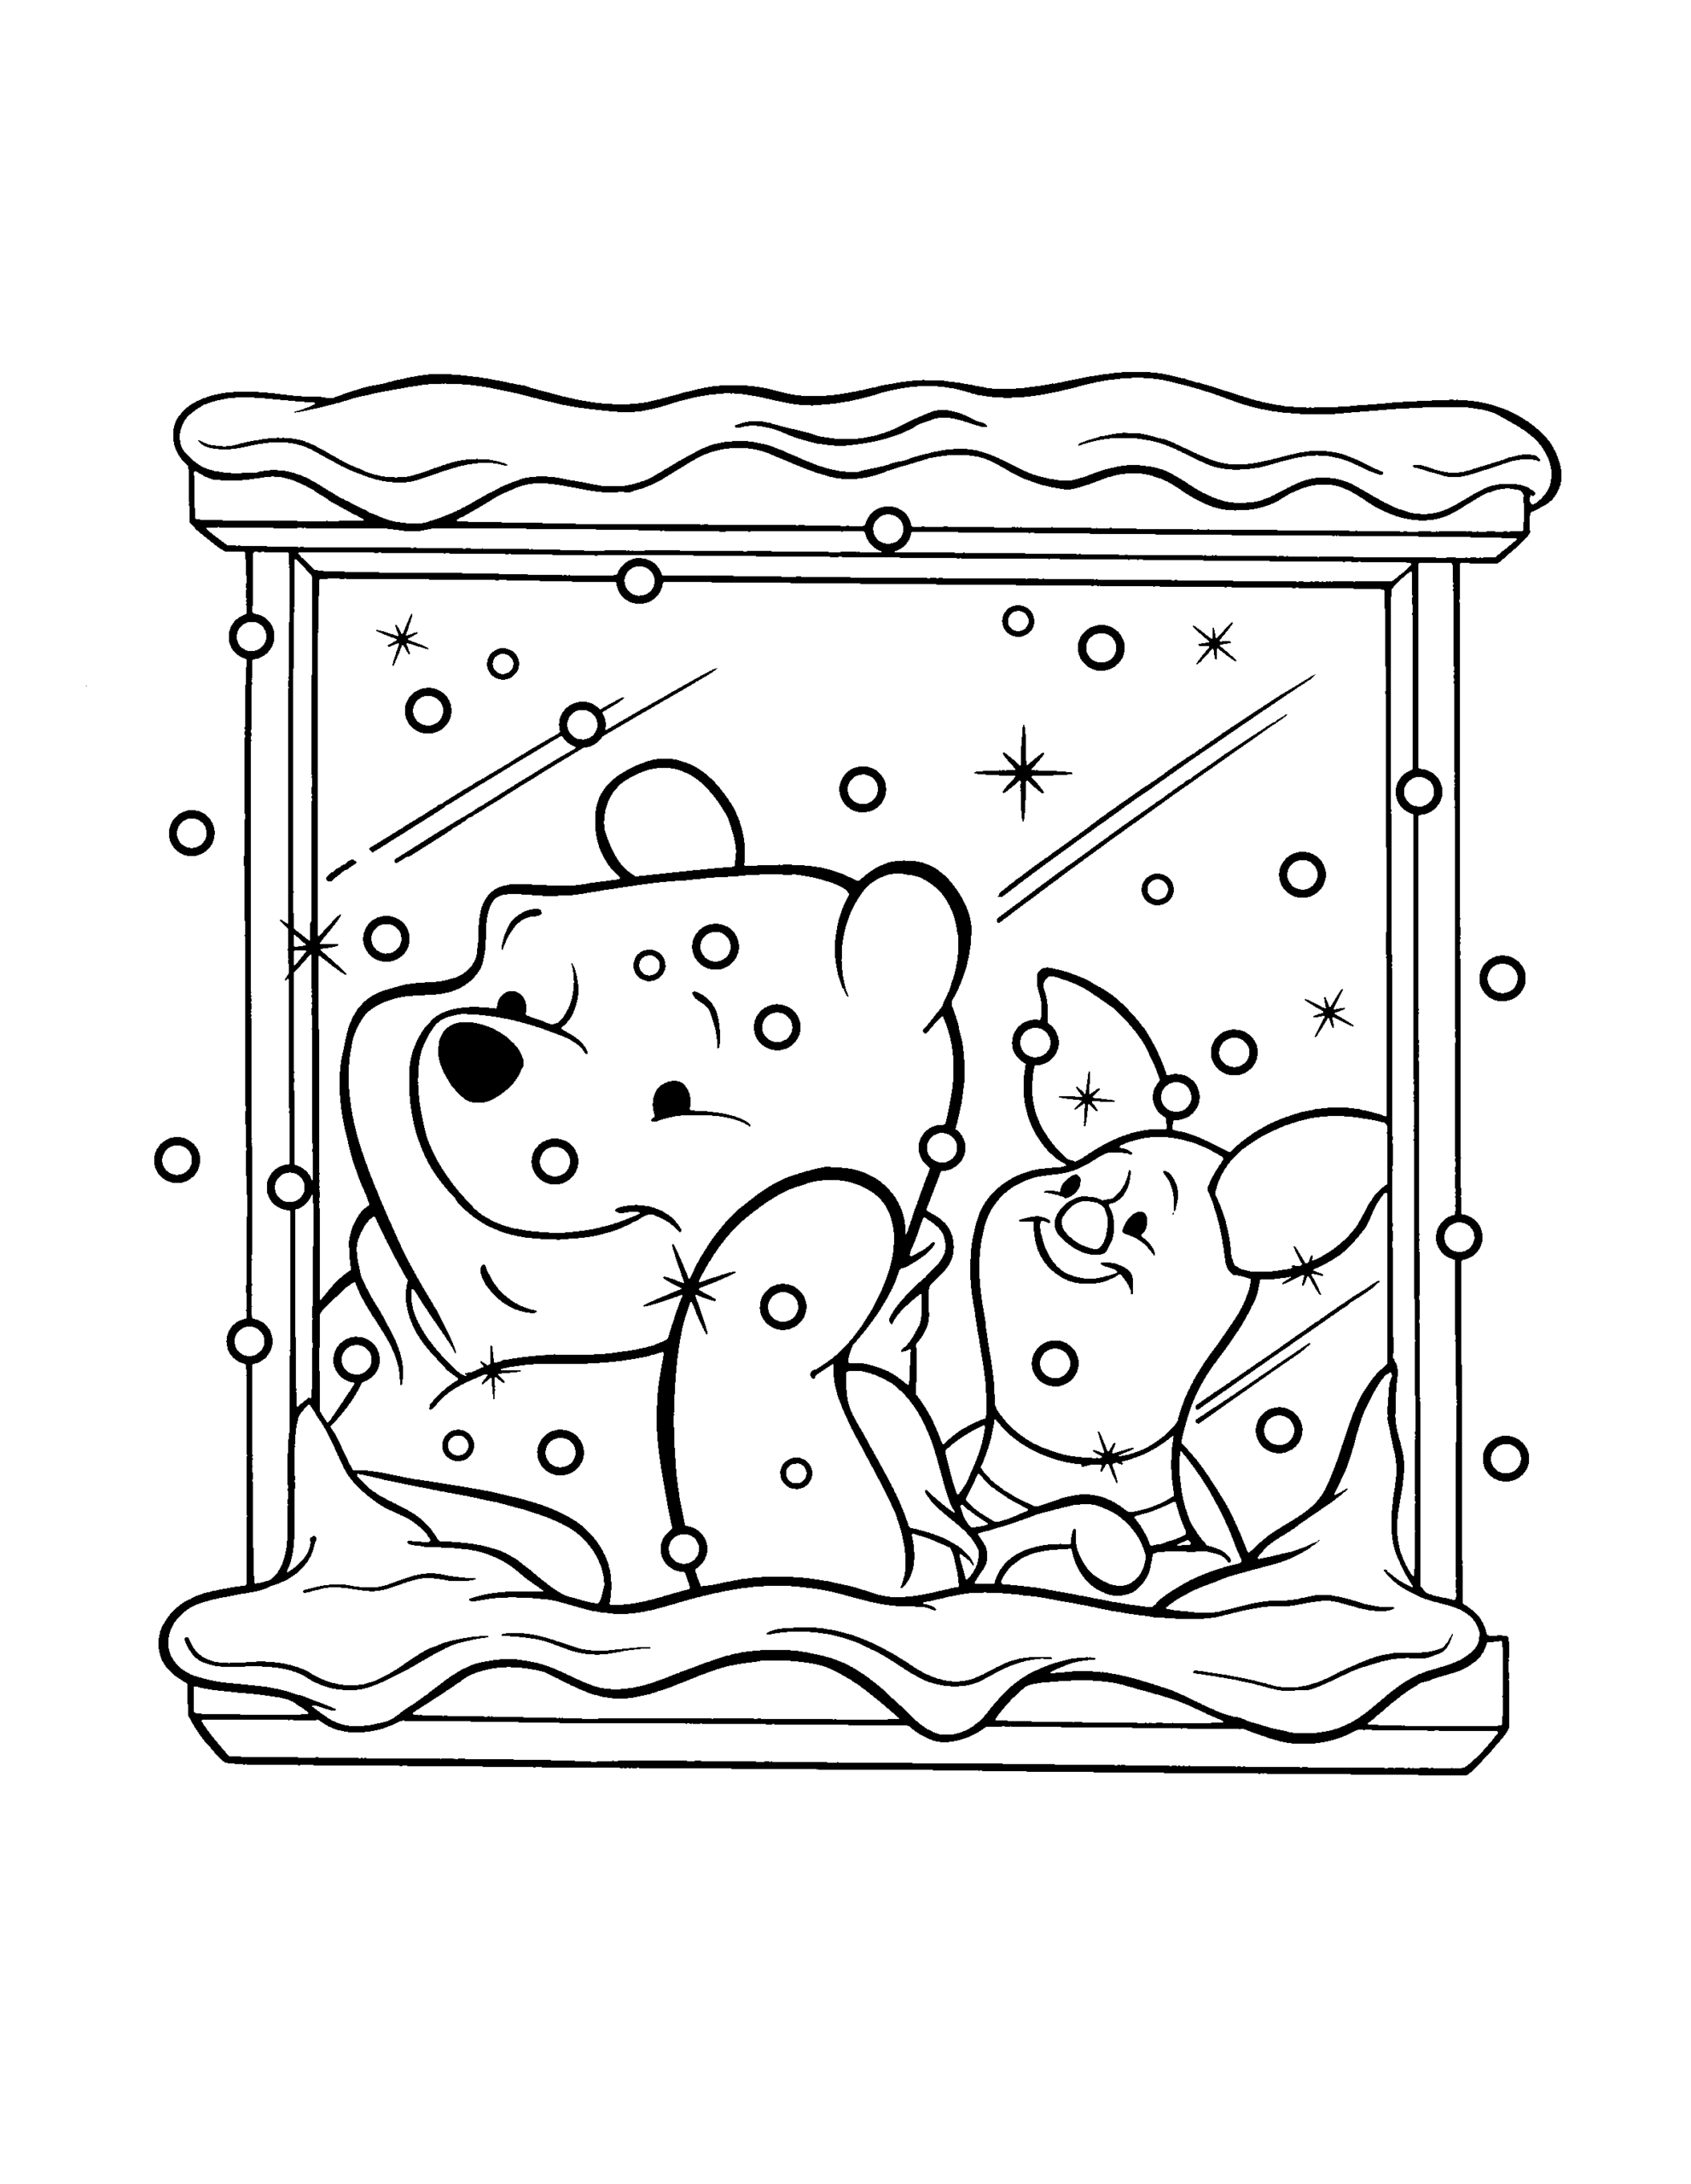 Winnie the Pooh Coloring Pages Cartoons winnie the pooh 62 Printable 2020 7179 Coloring4free